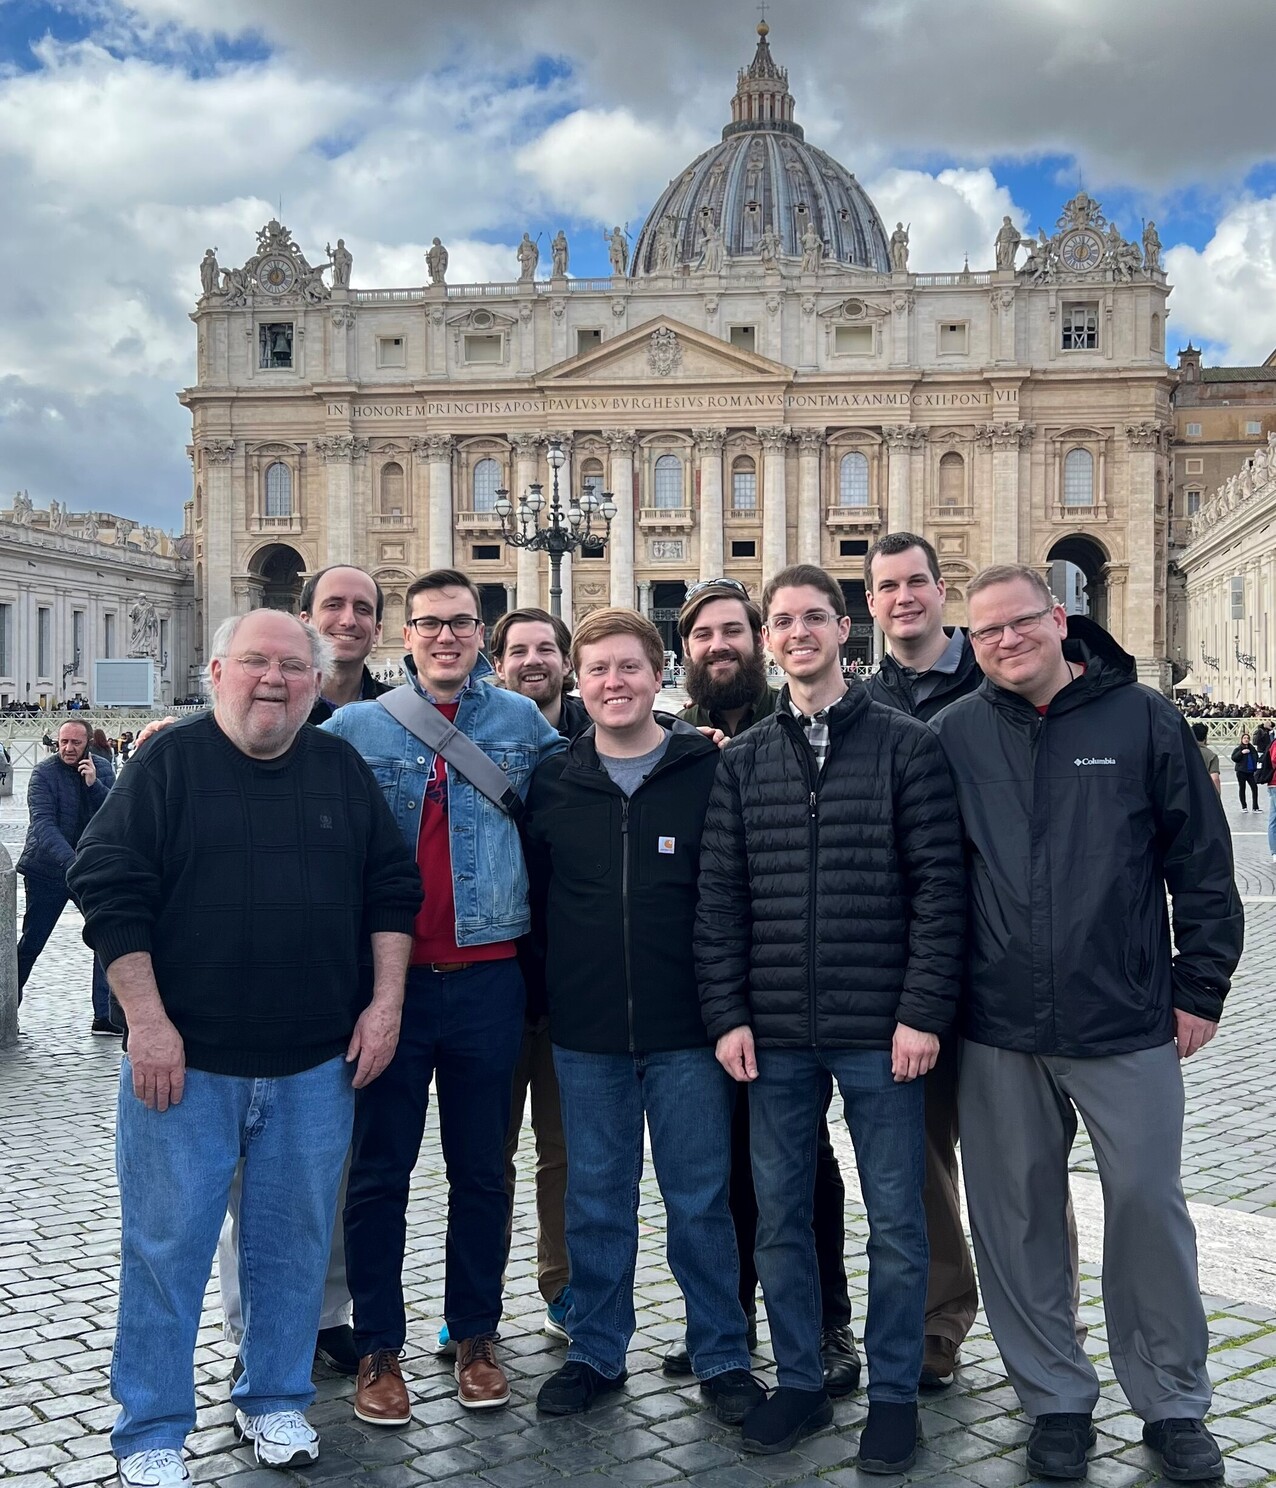 Day 3: Basilica, church tours are highlights for seminary group